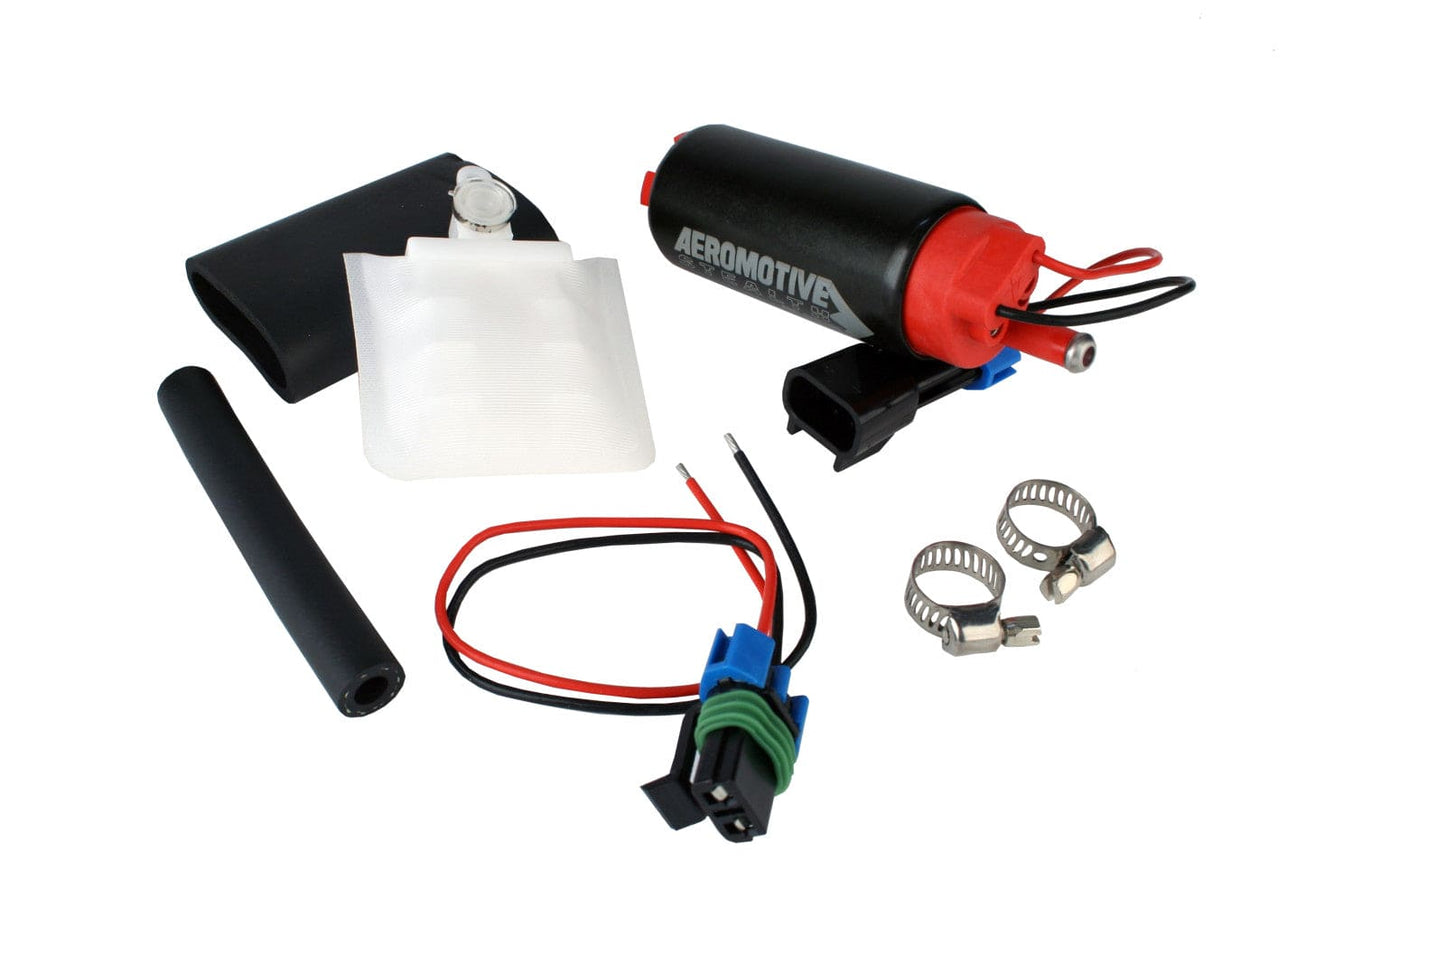 Aeromotive Fuel Pump, E85, Offset Inlet - Inlet inline w/ outlet, 340lph (This item will supersede P/N 11142) - Rico's Garage